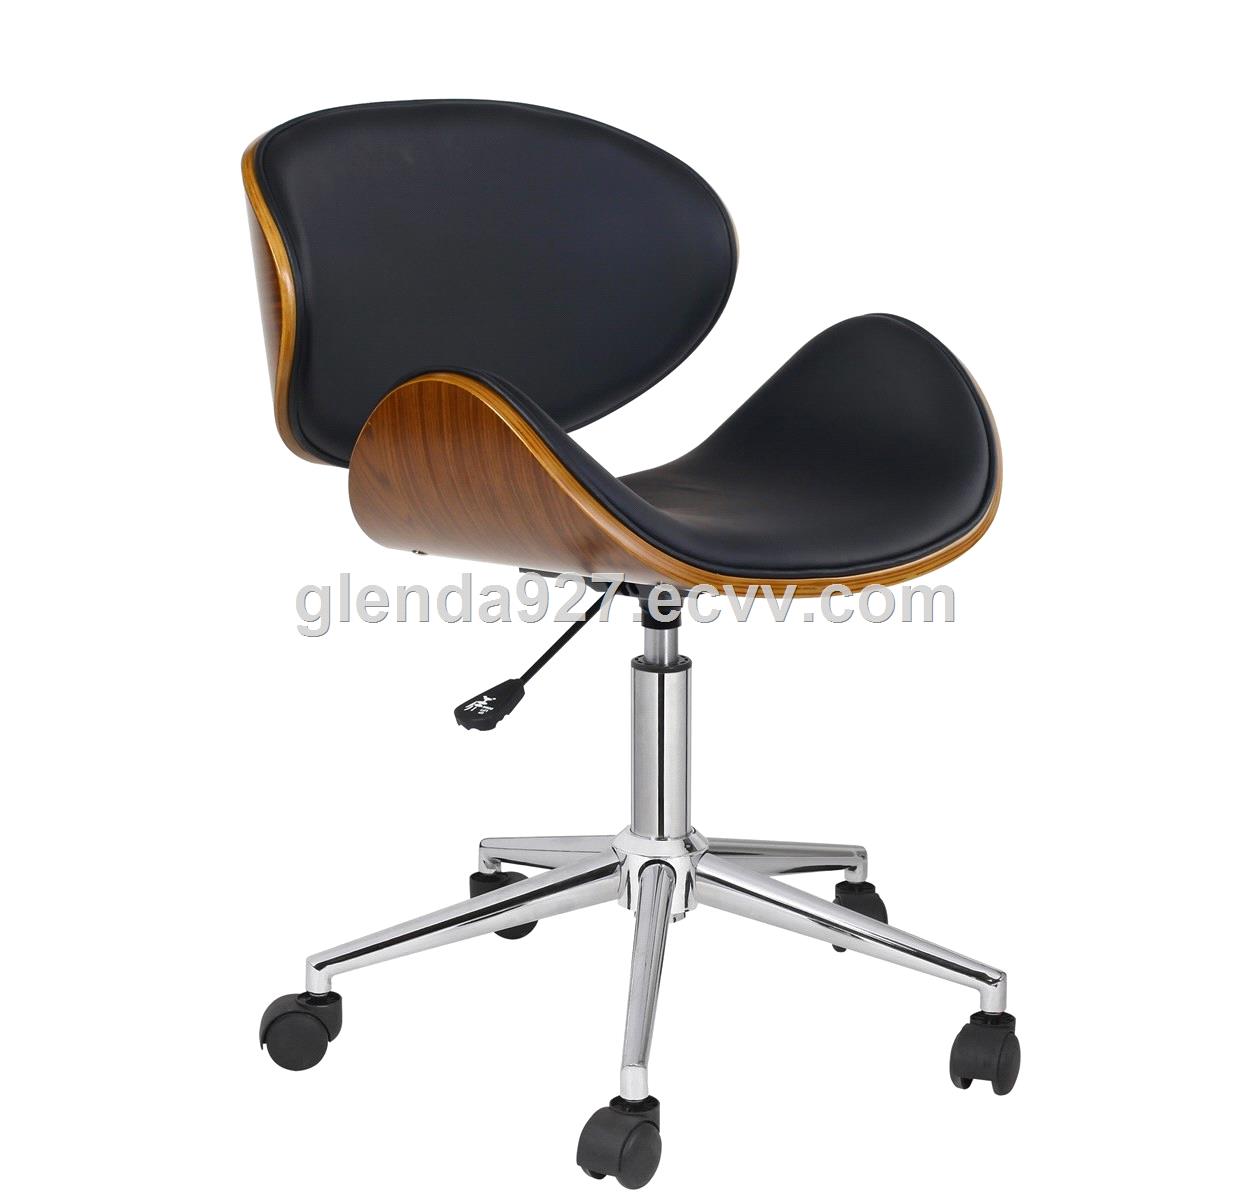 luxury bentwood leather executive office furniture office chair